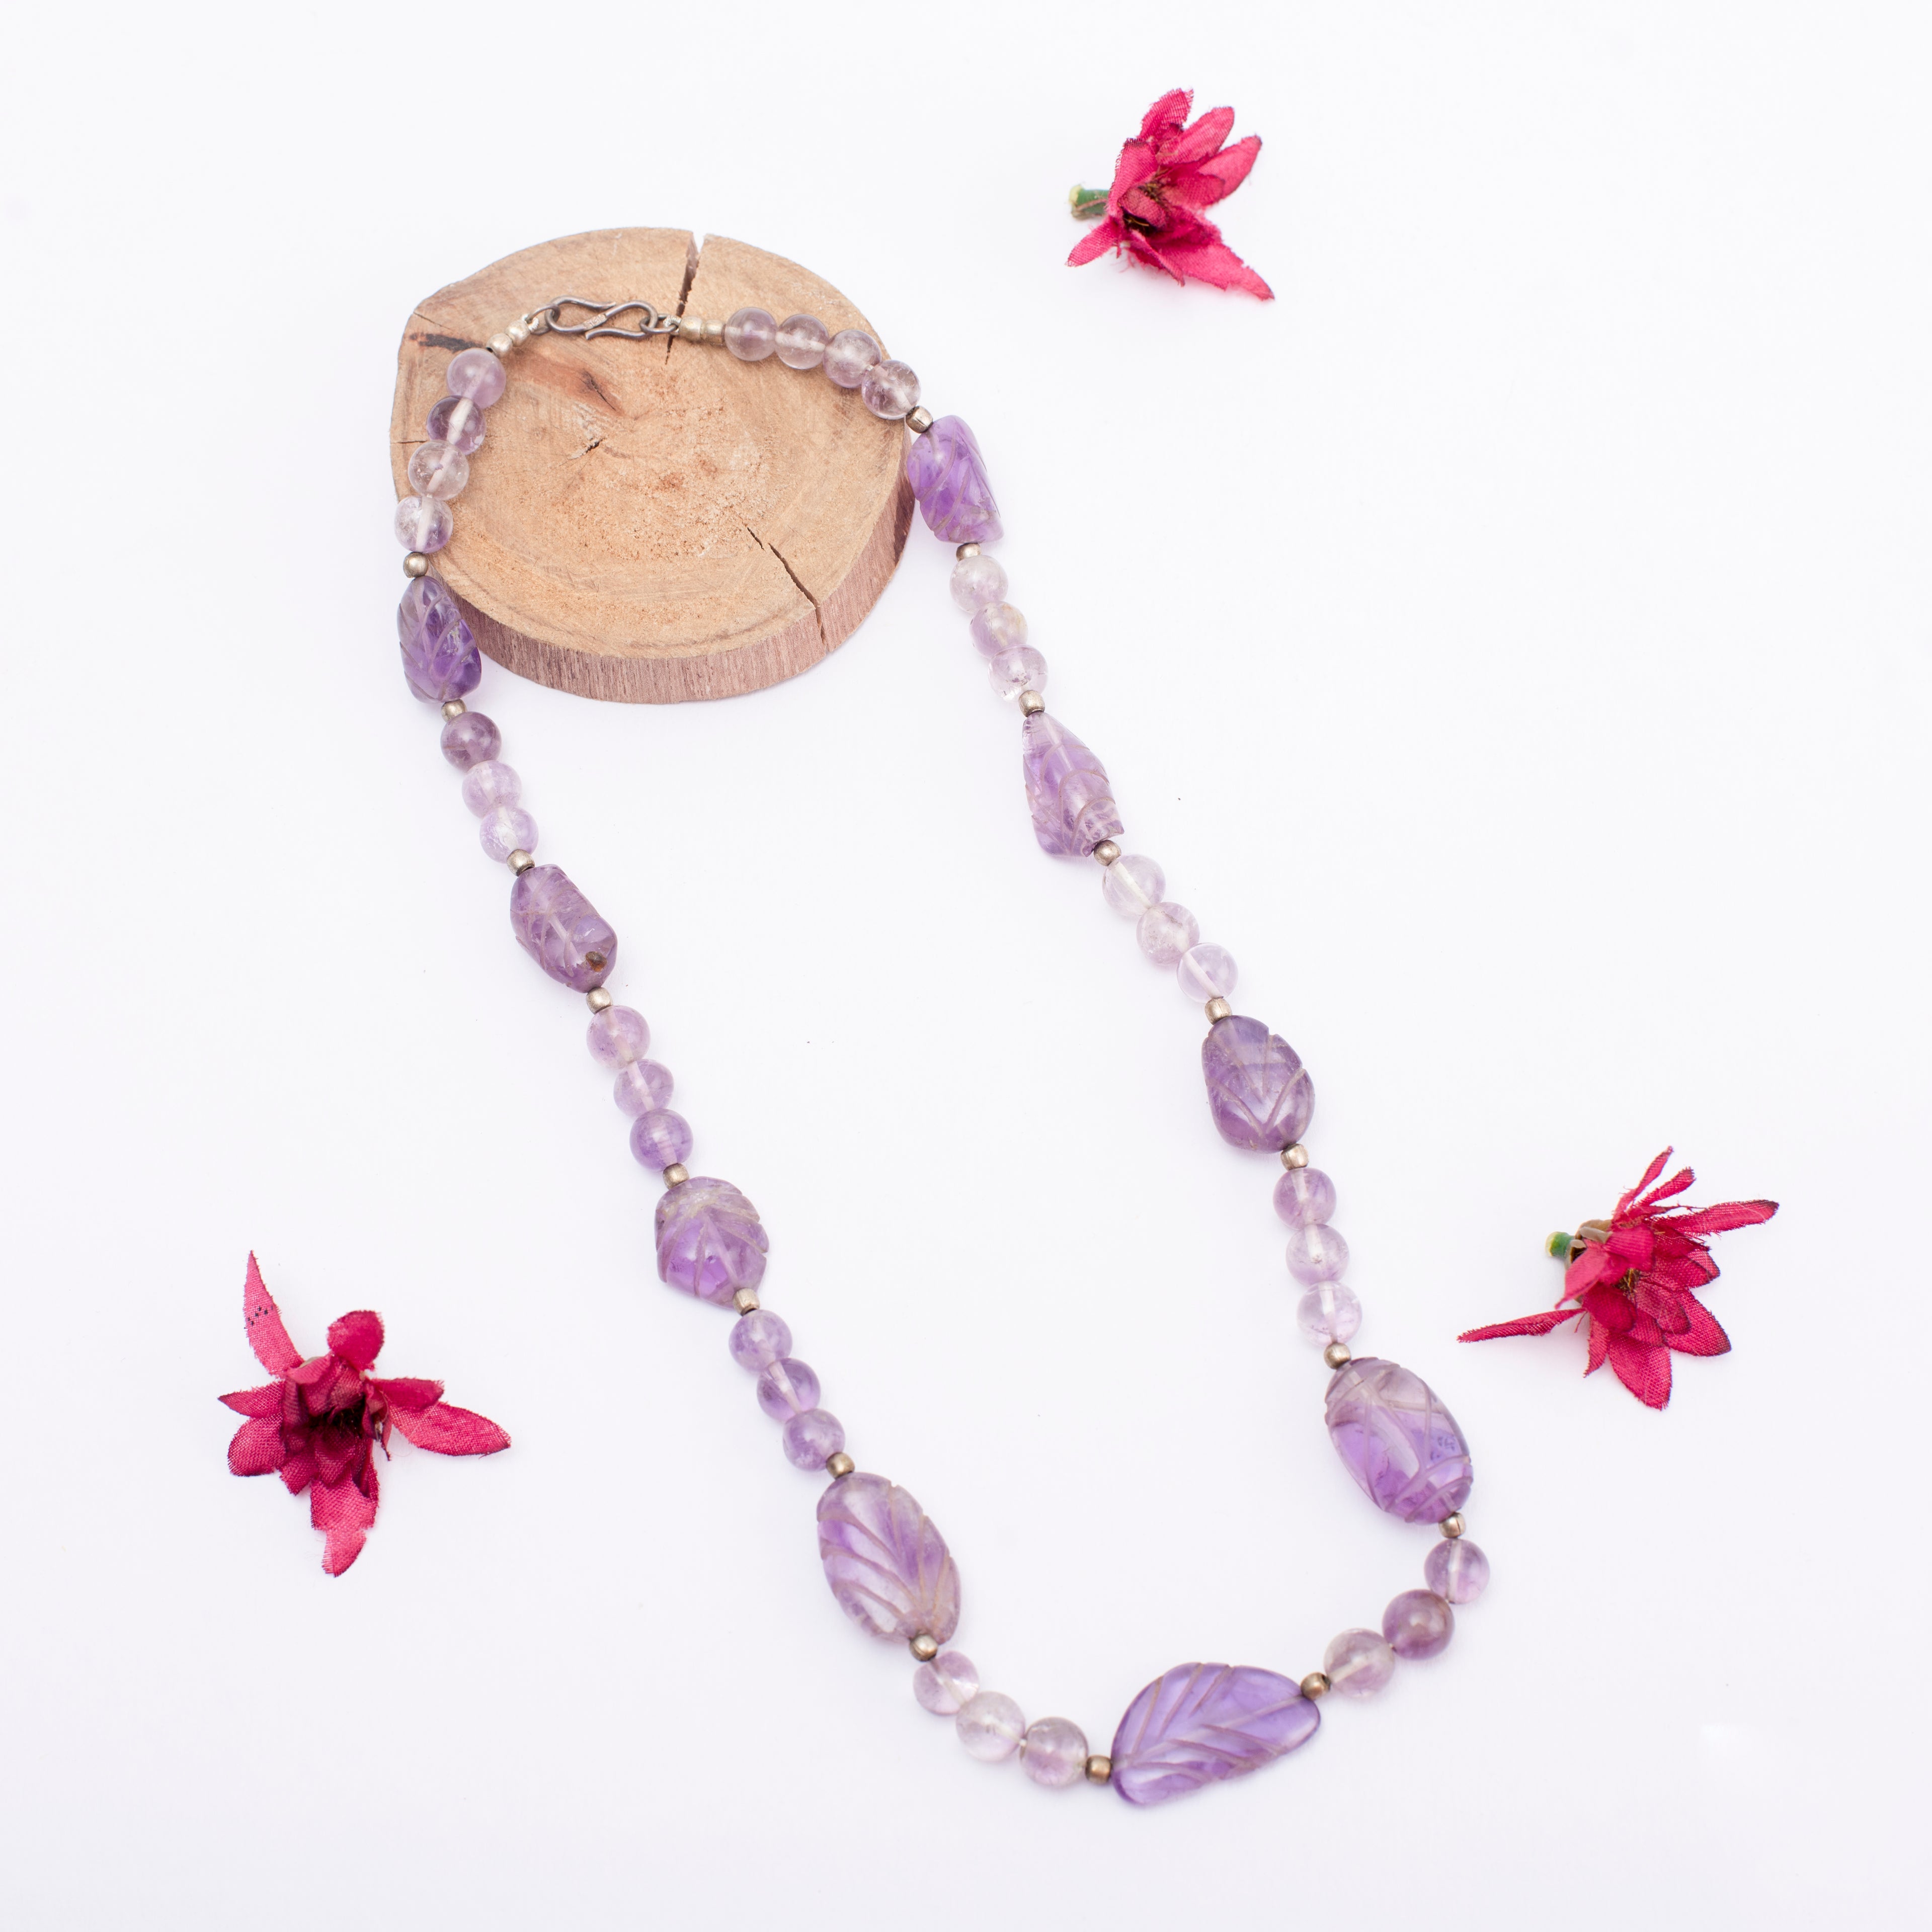 Amethyst Leaf Shaped with Metal Beads Necklace